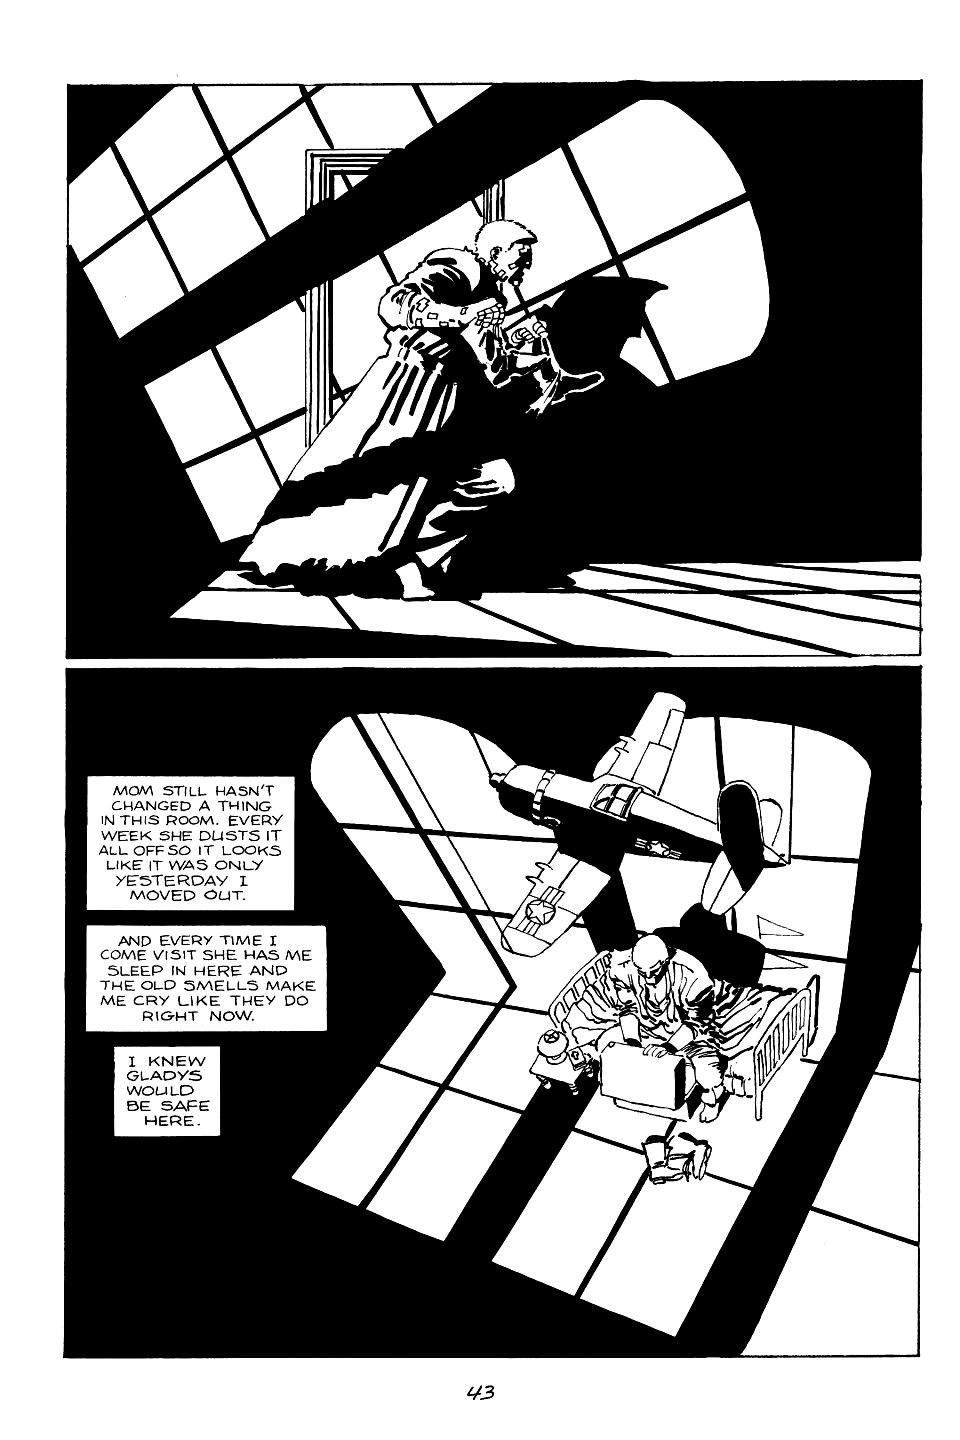 page 43 of sin city 1 the hard goodbye